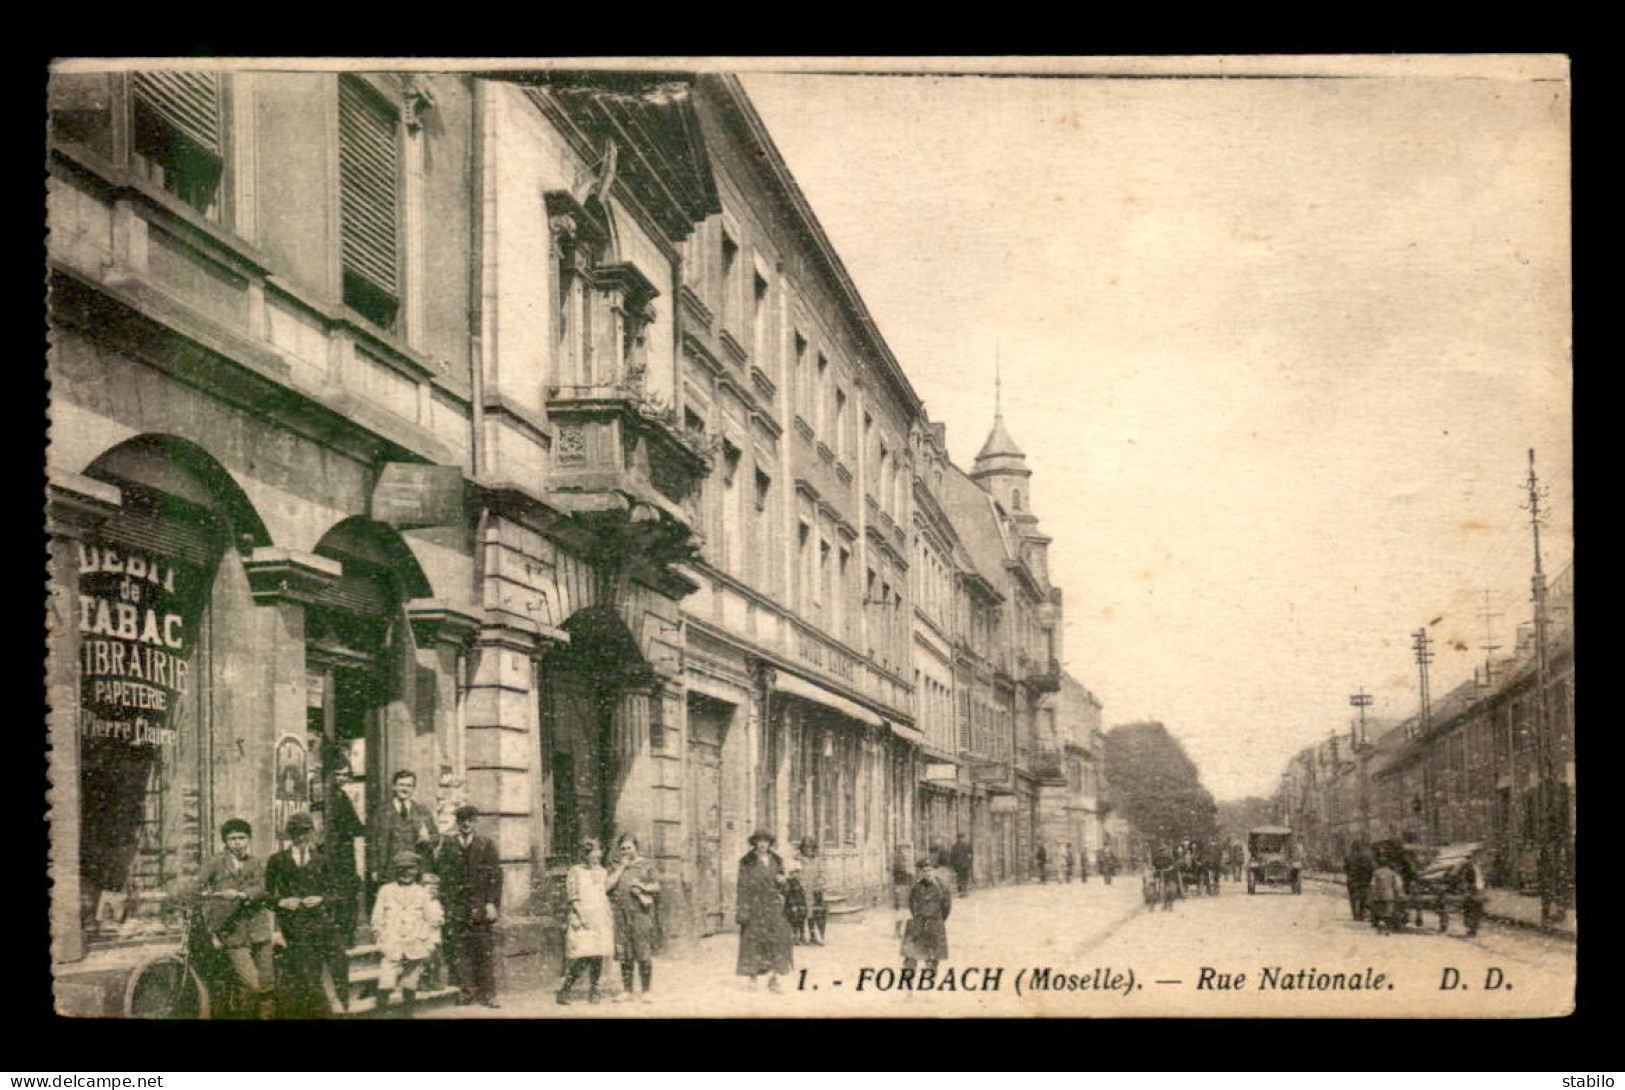 57 - FORBACH - RUE NATIONALE - TABAC LIBRAIRIE PIERRE CLAIRE - Forbach